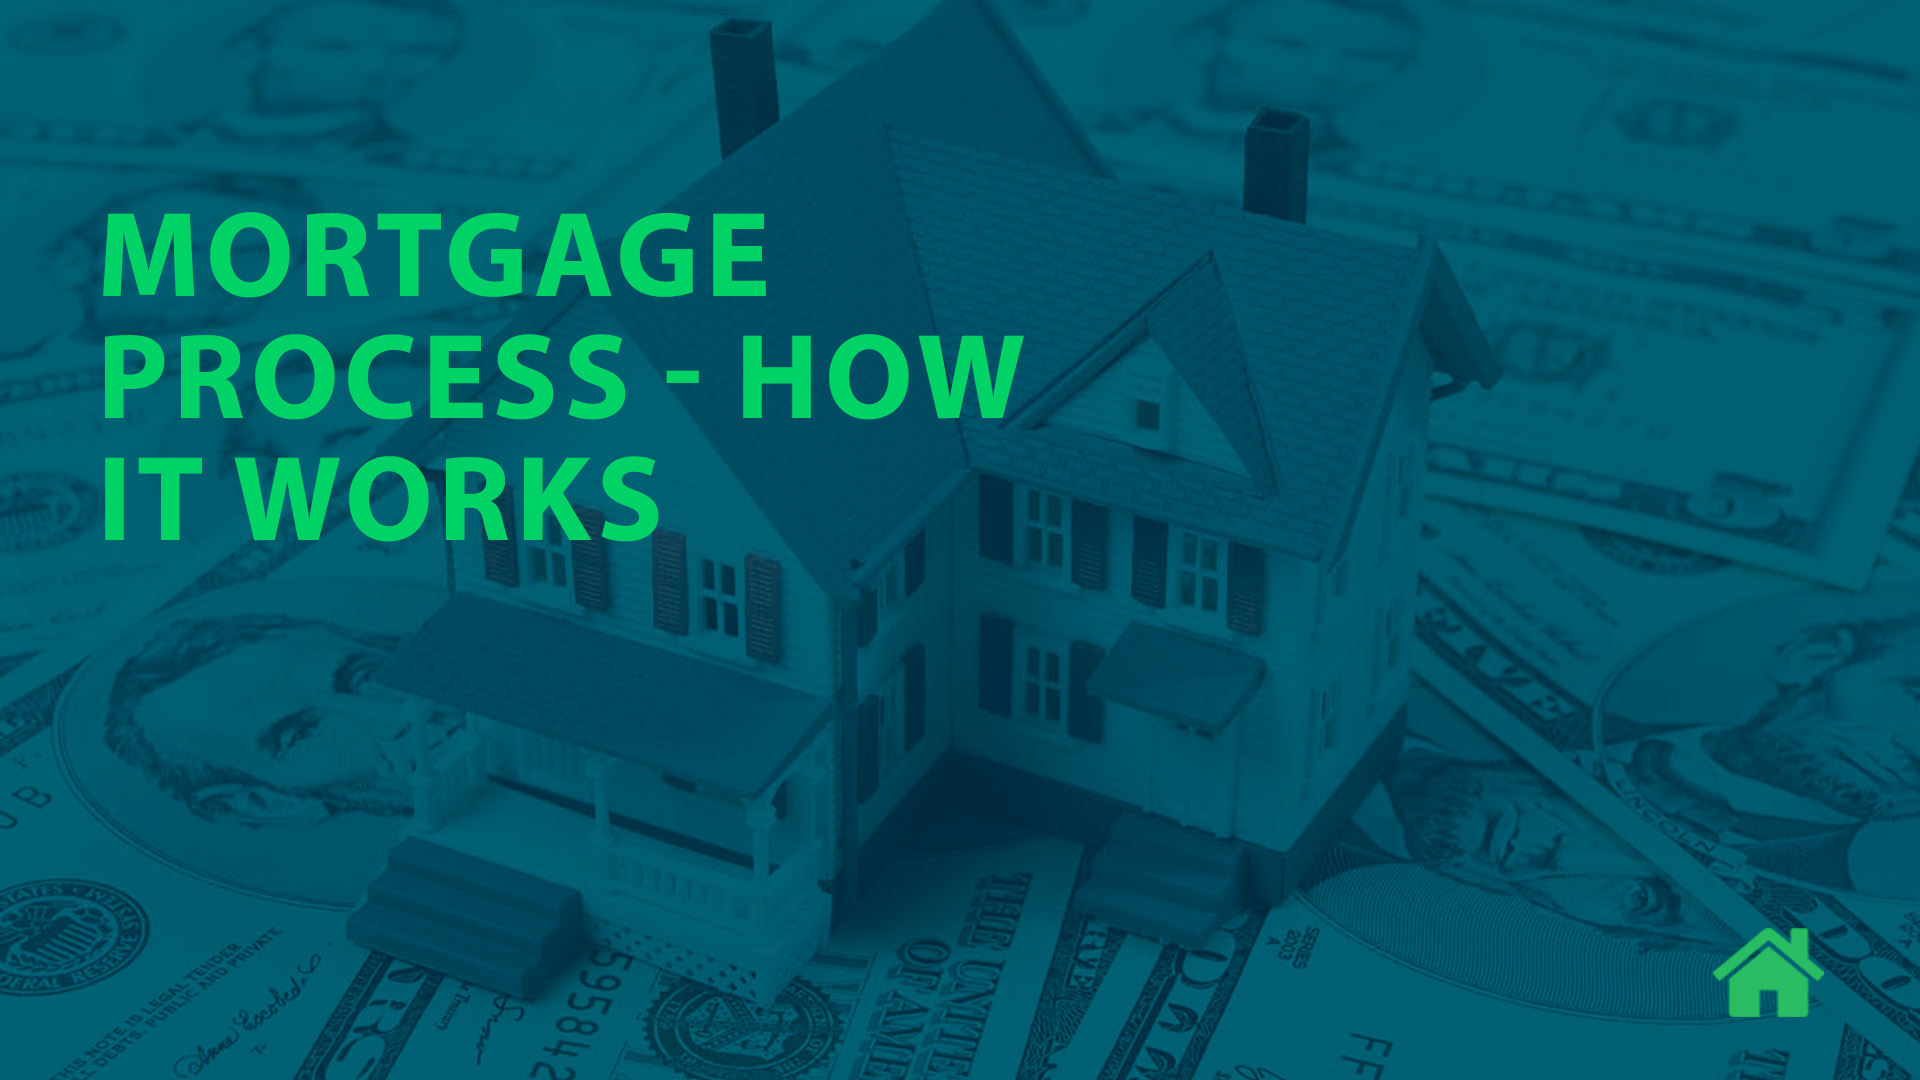 Mortgage process - How it Works